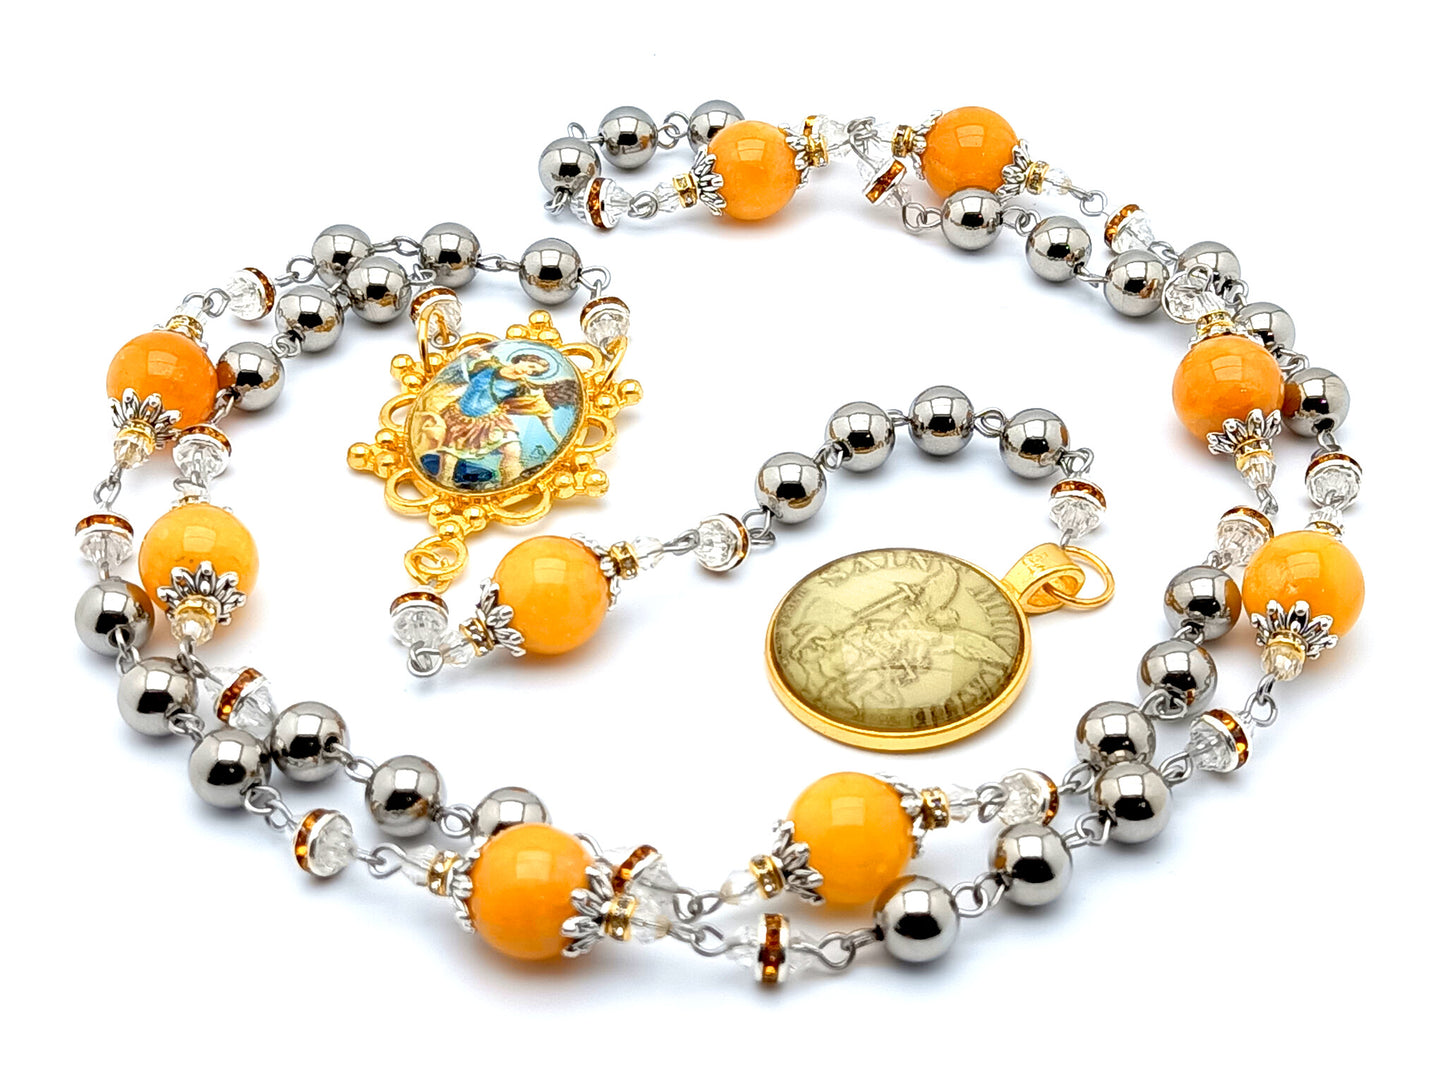 Saint Michael unique rosary beads prayer chaplet with stainless steel and yellow jade gemstone beads and domed Saint Michael picture medal.